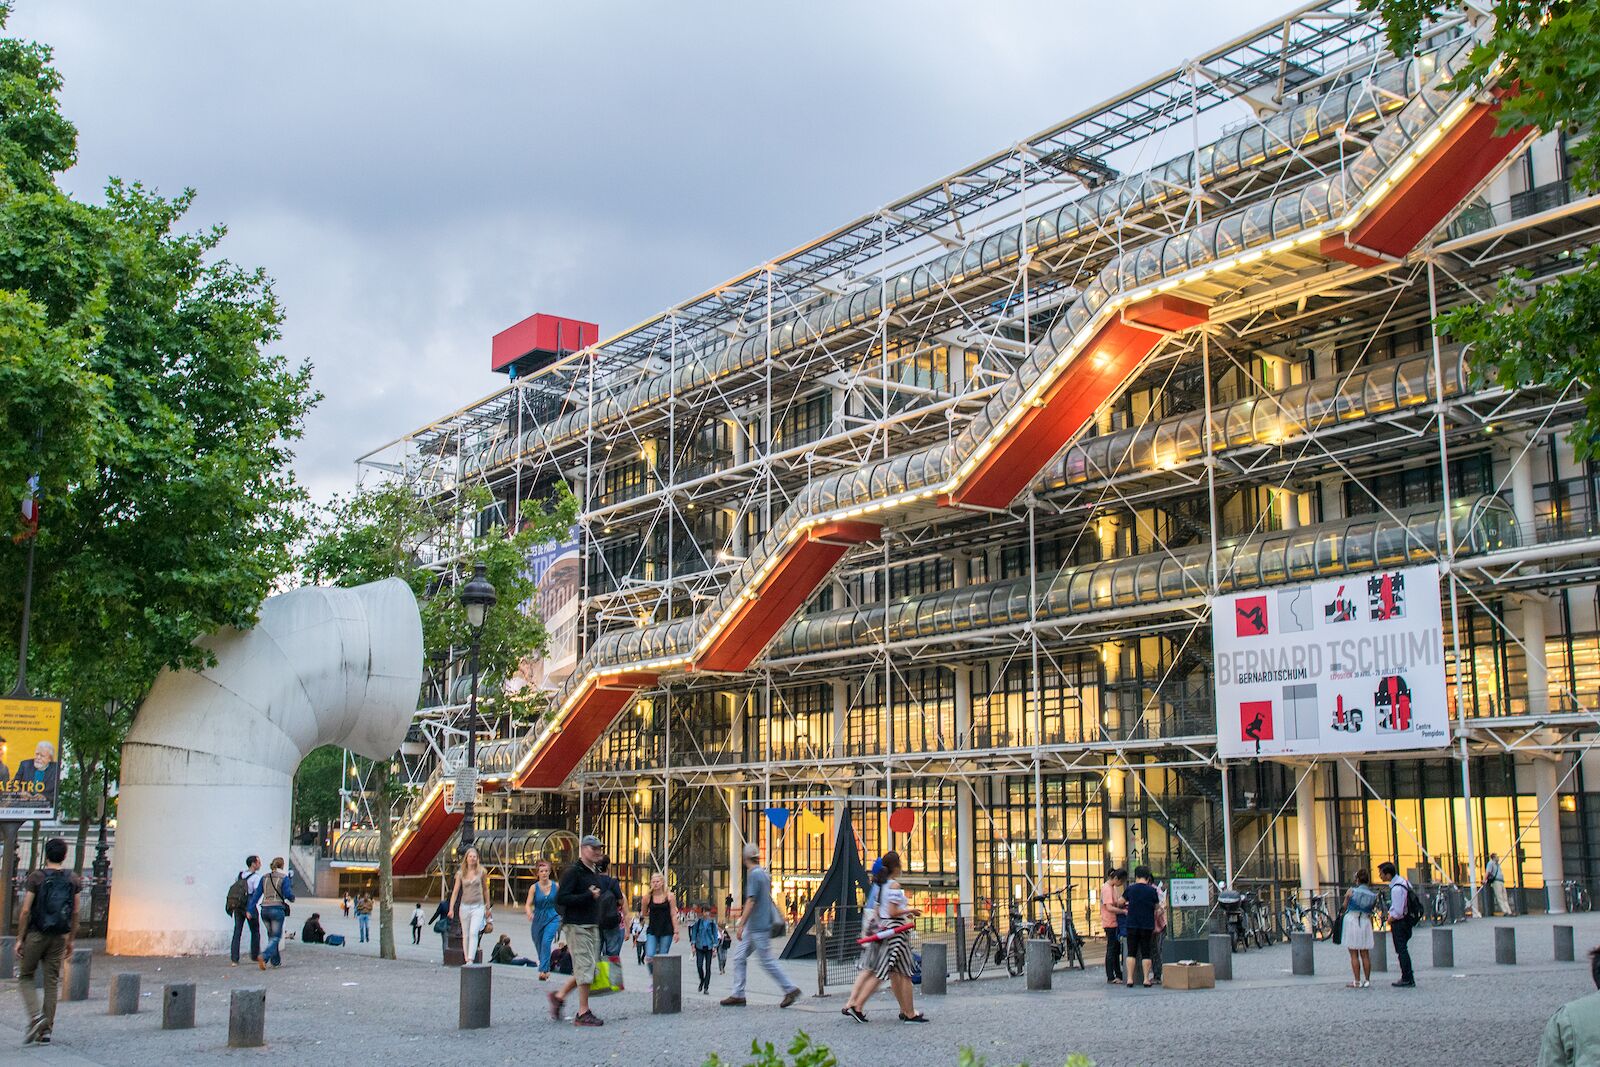 Paris museums: The famous exterior of the Centre Pompidou, a museum of Modern art located in Paris